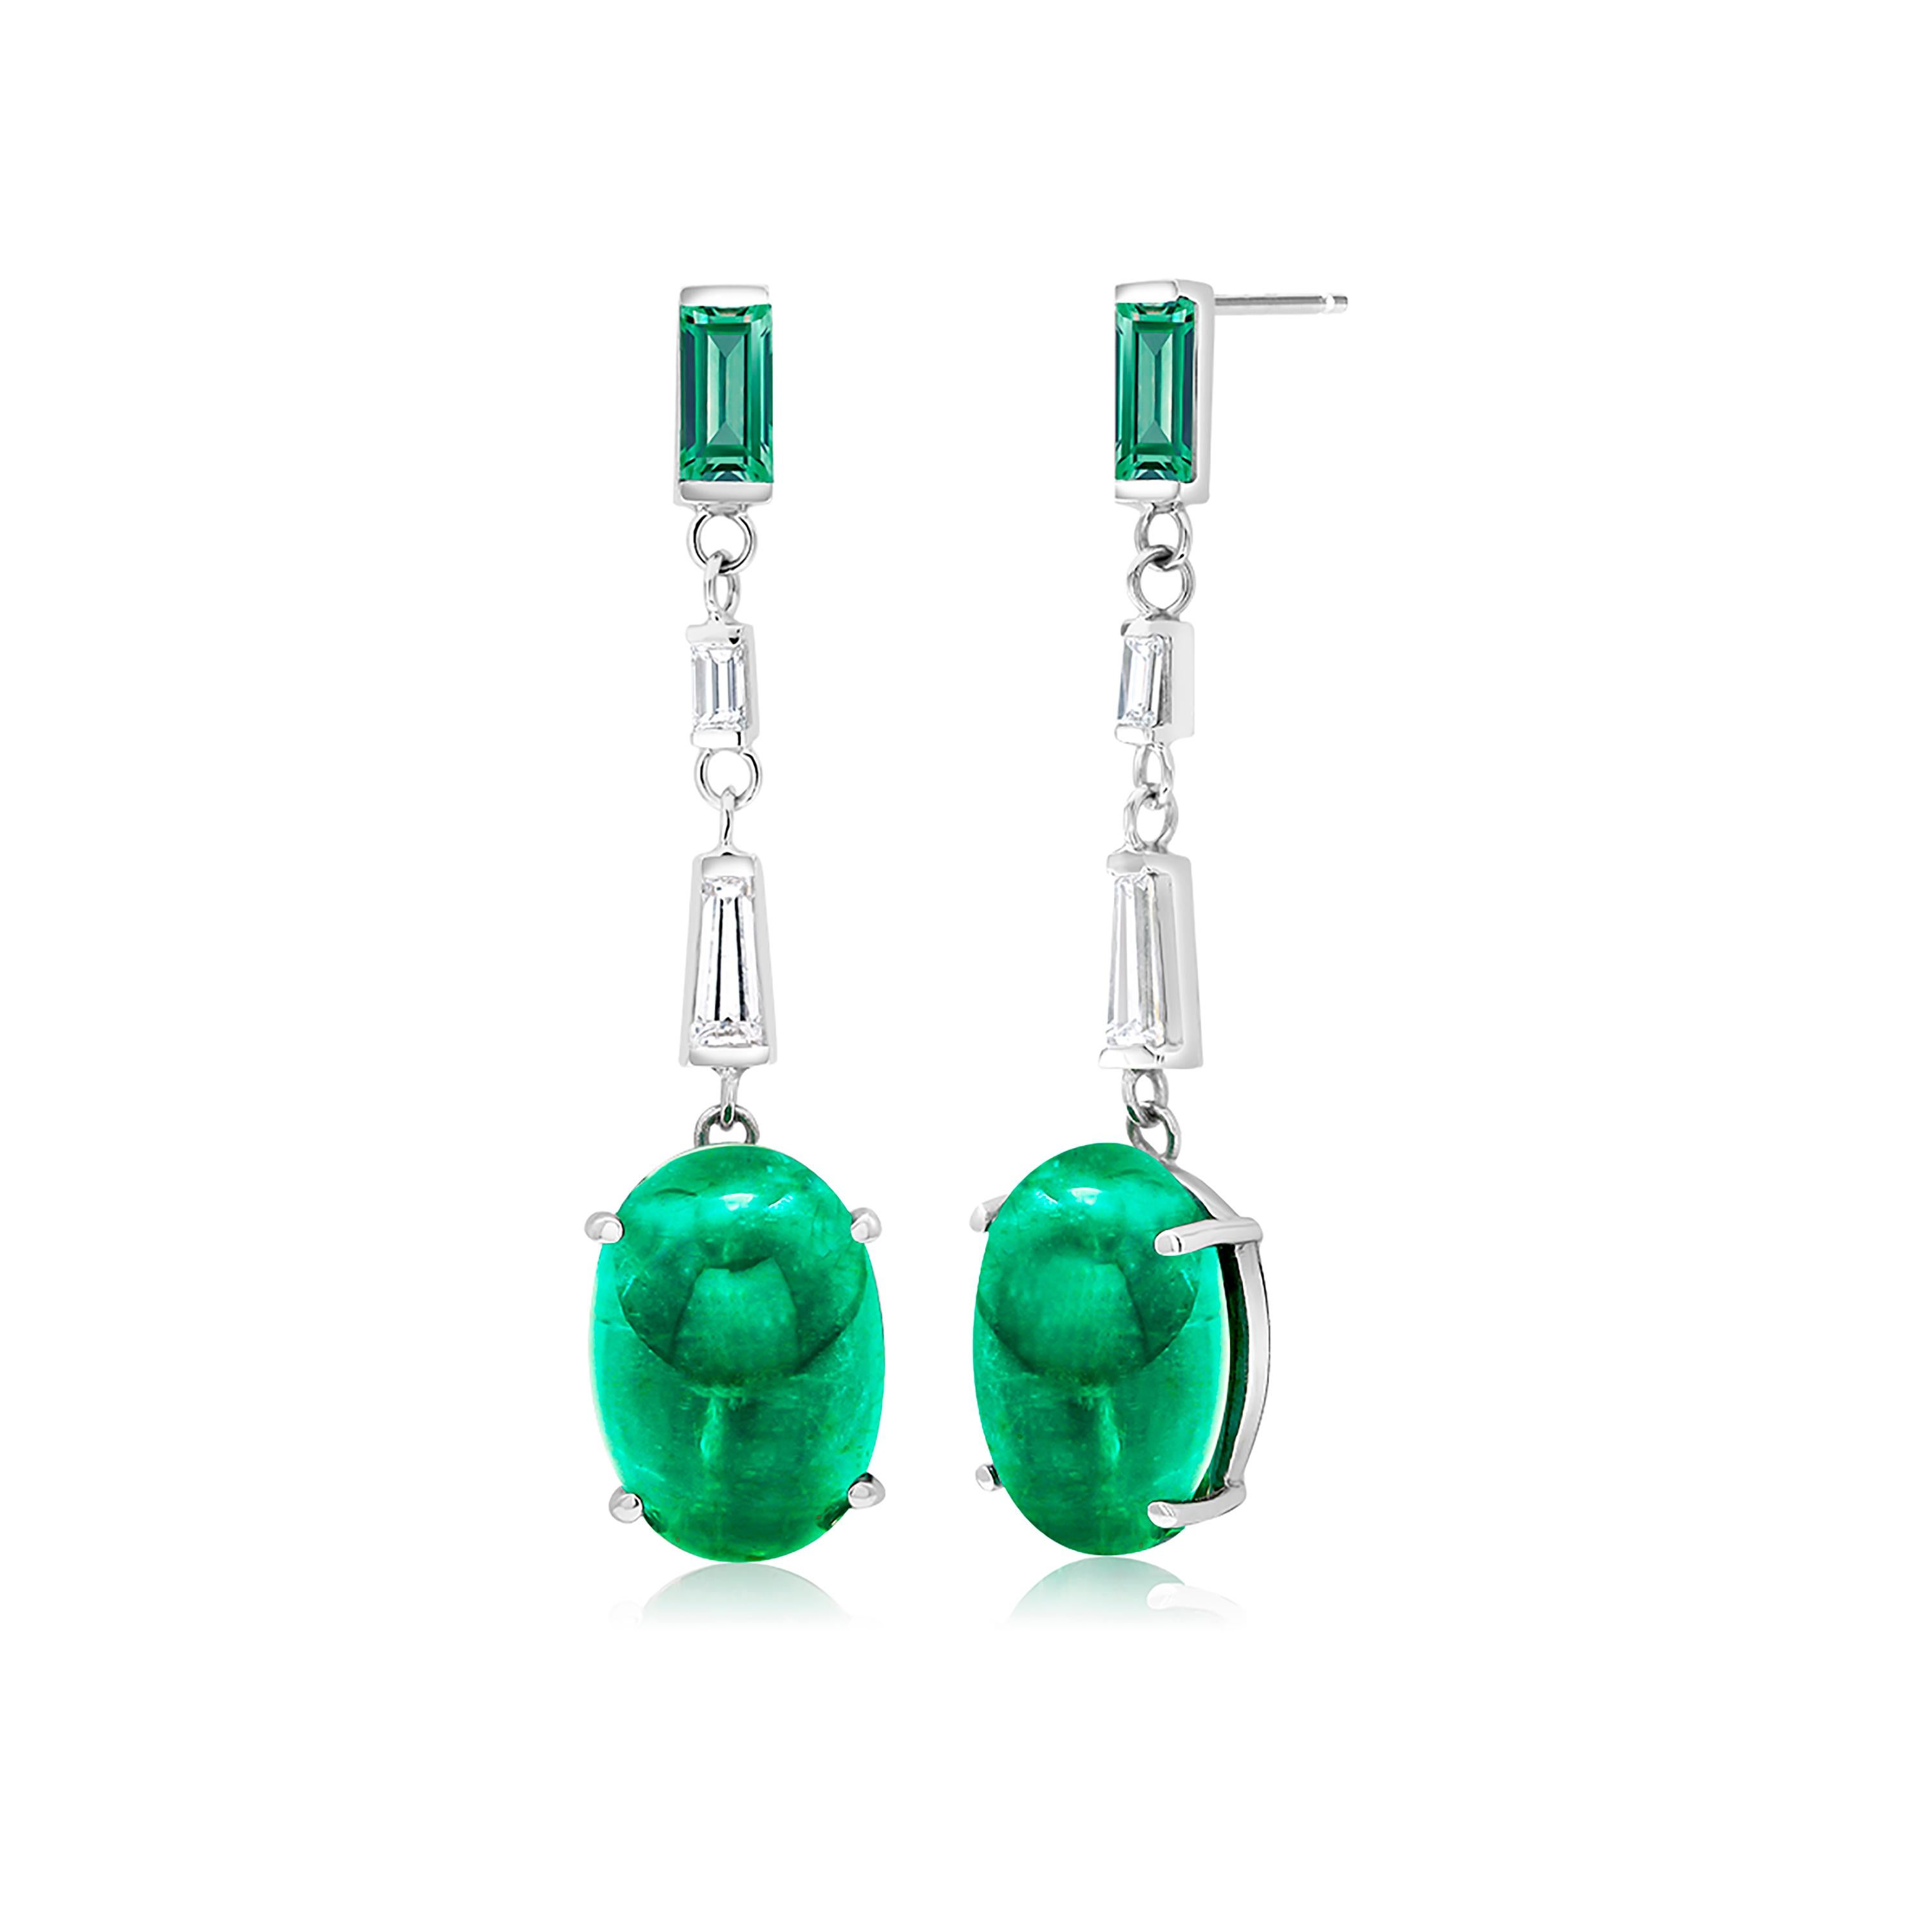 Fourteen karats white gold large cabochon emerald and baguette diamond and emerald drop earrings 
Two Taper Baguette Diamond weighing 0.90 carat
Two Cabochon emeralds weighing 13.00 carat 
Two Baguette diamond weighing 0.25 carat
Two Baguette